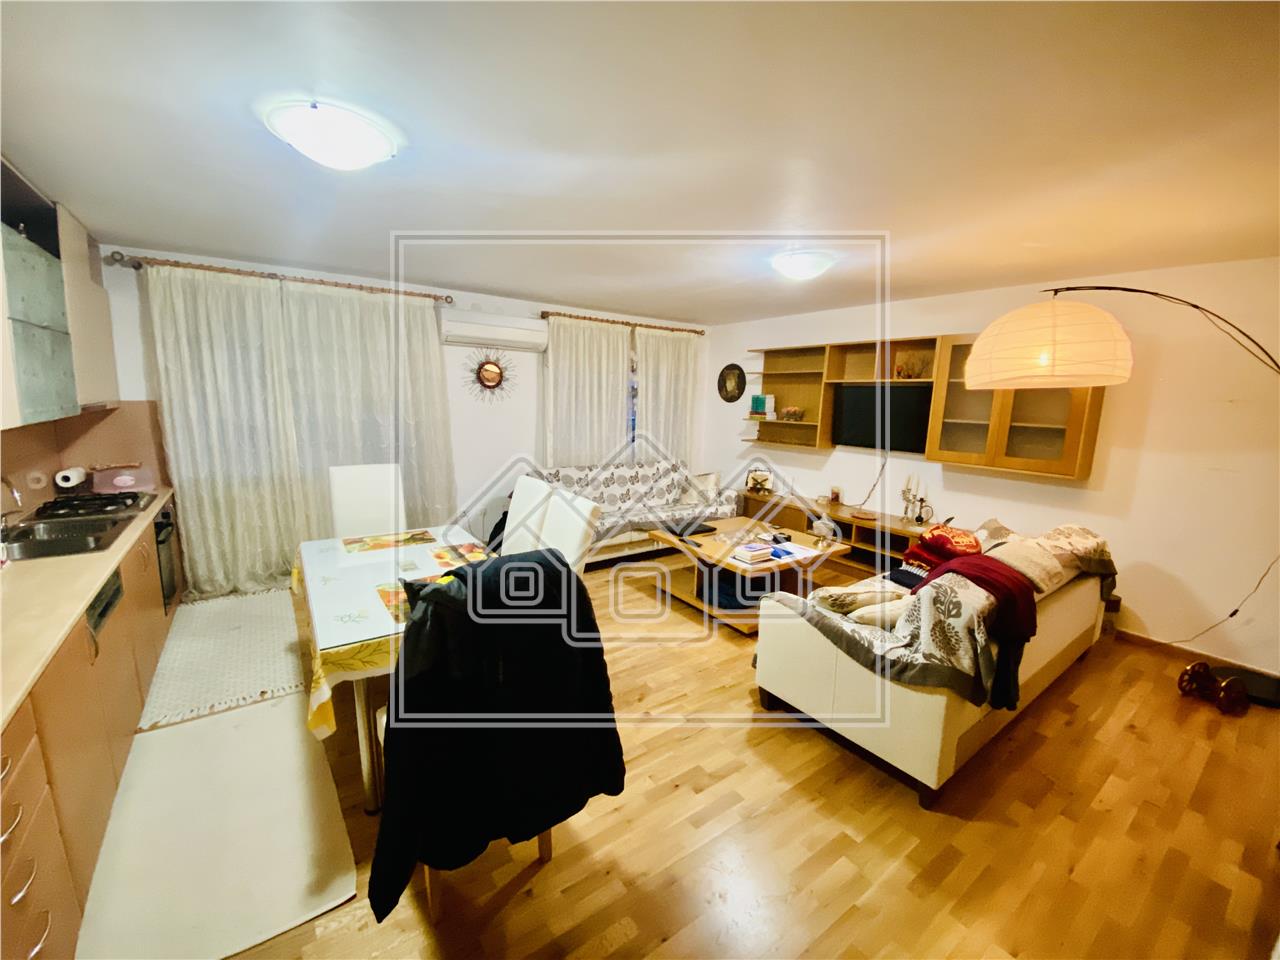 Apartment for sale in Sibiu - 90 usable sqm - 3 rooms and balcony